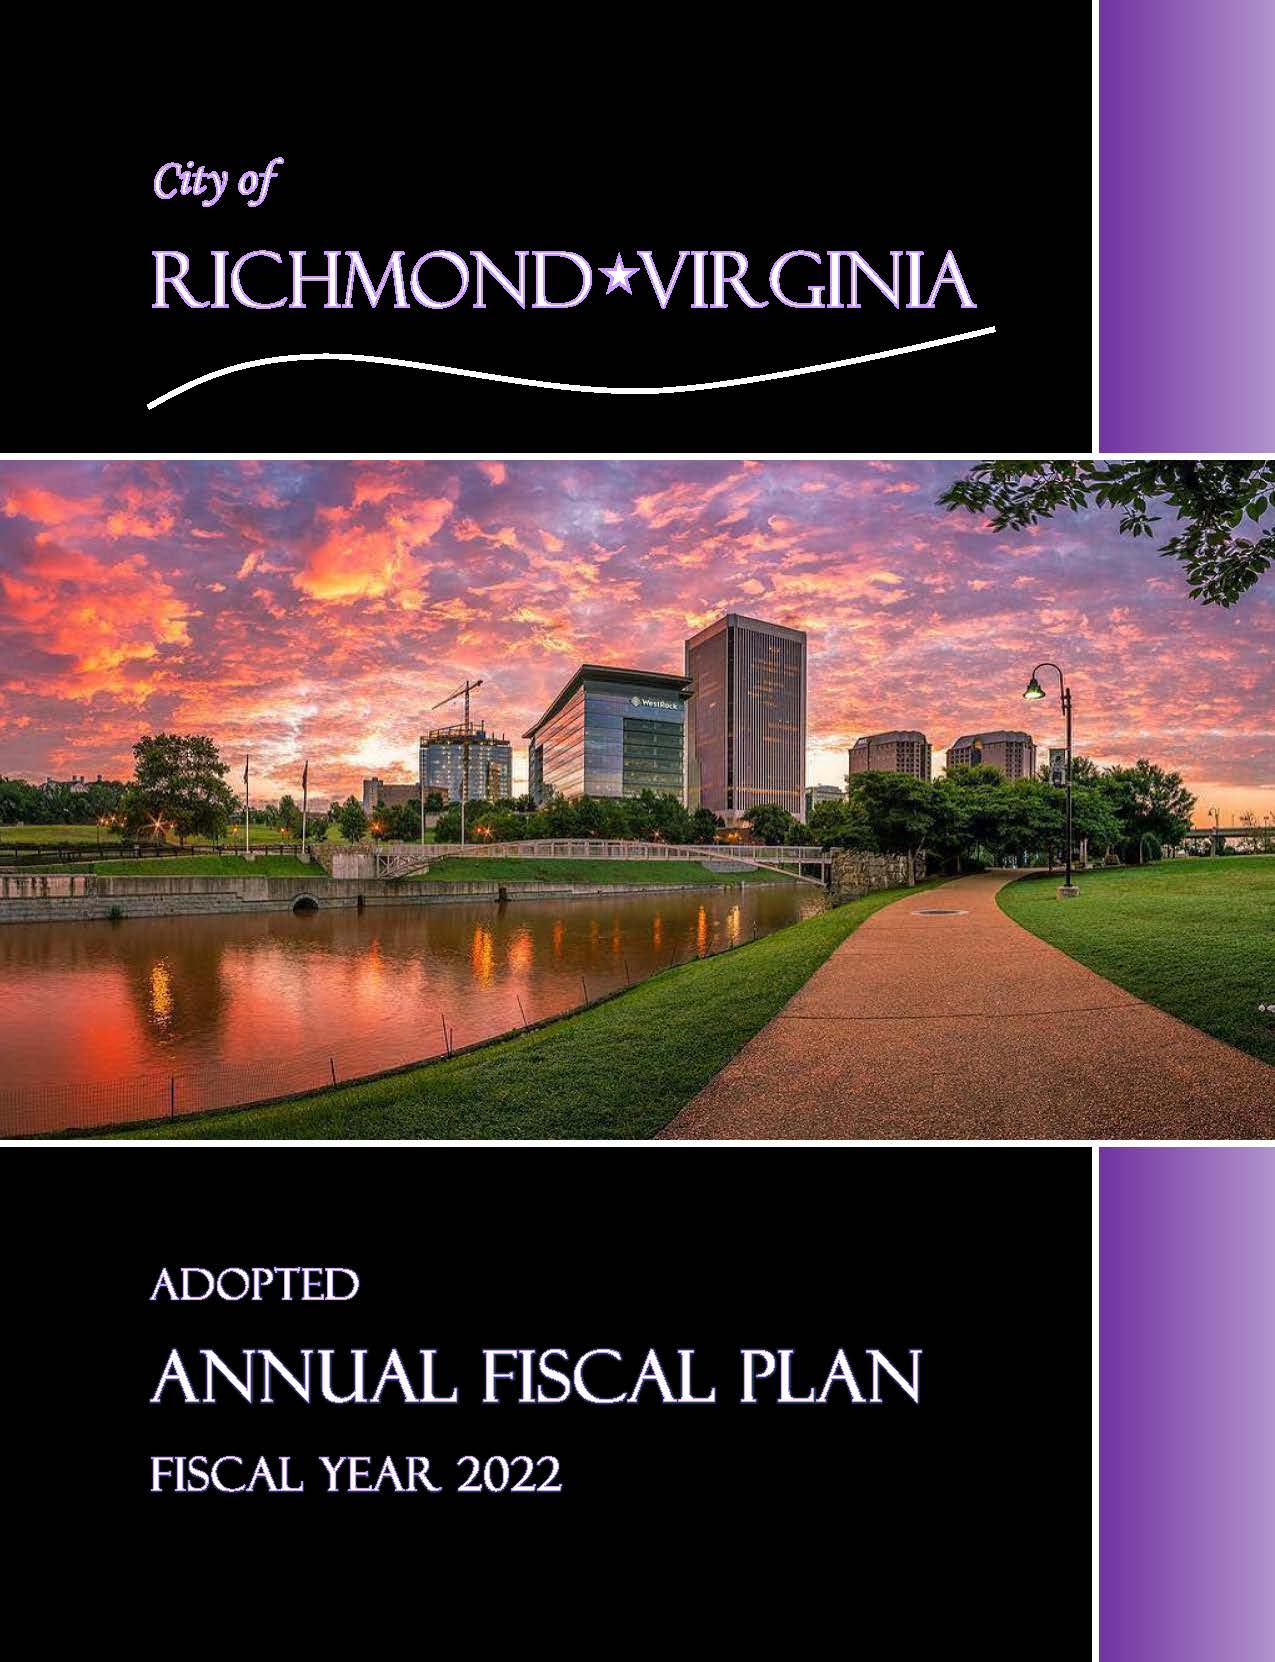 Adopted Annual Fiscal Plan for Fiscal Year 2021